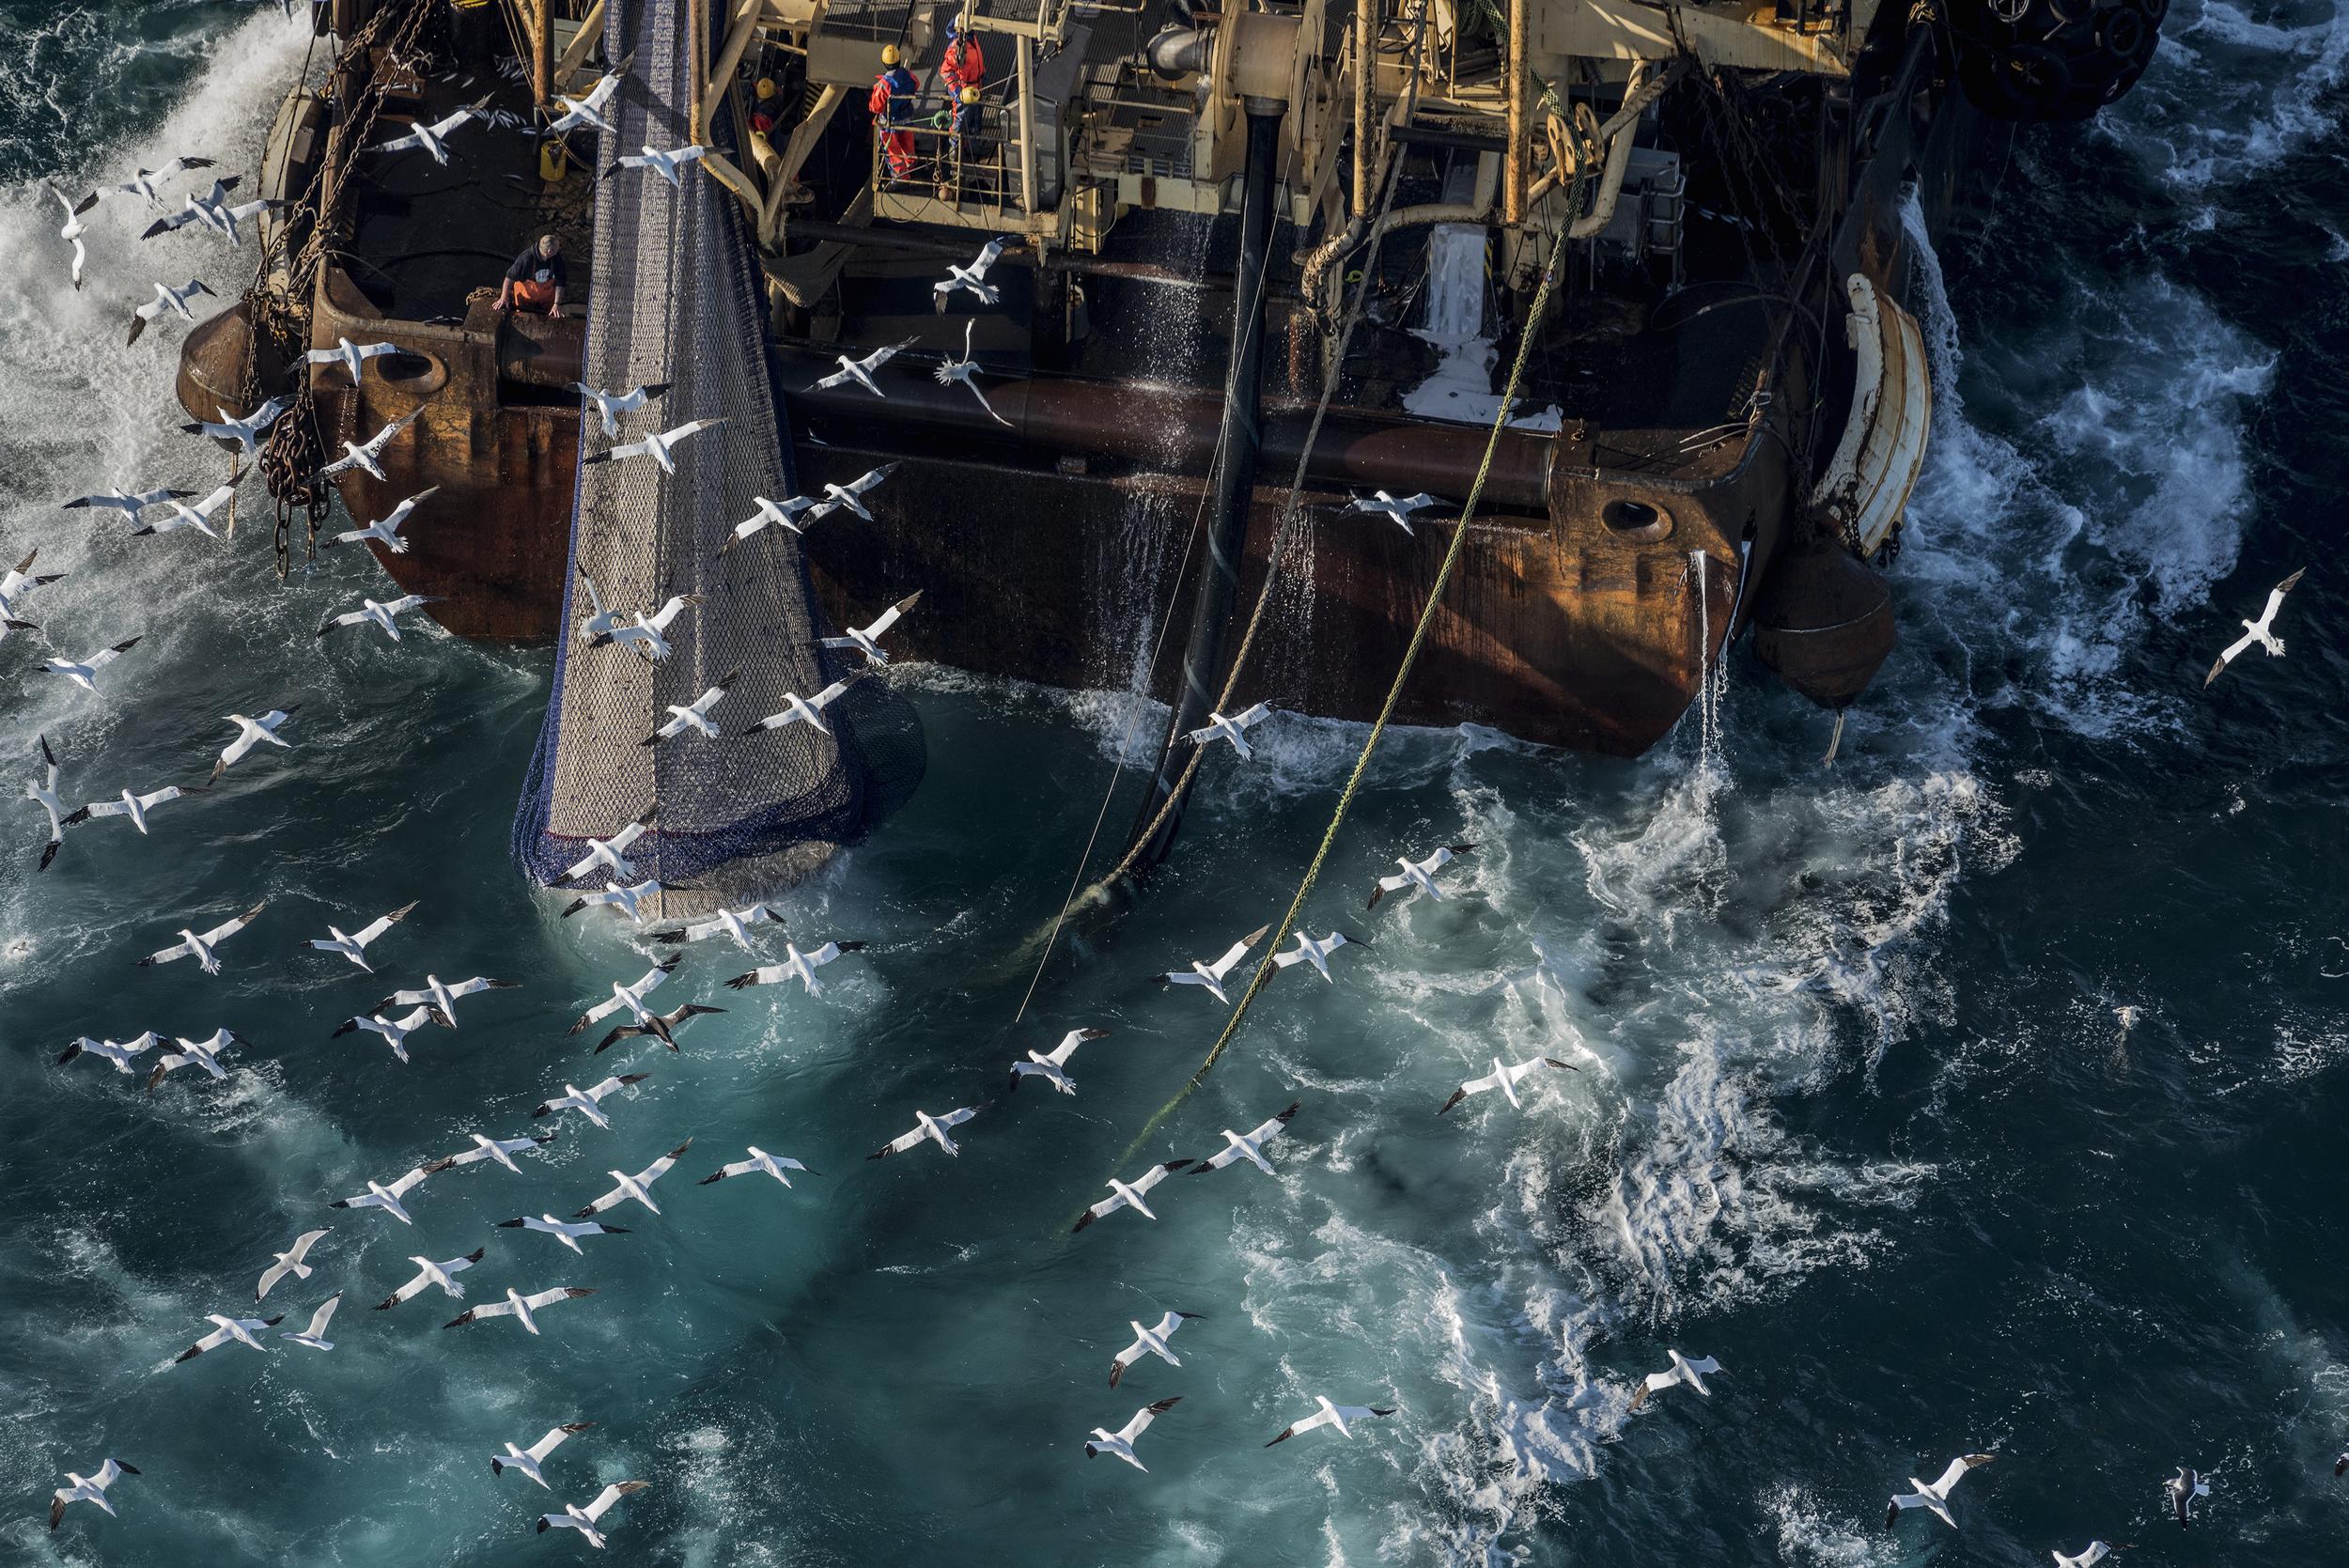 Gannets fly over a trawler as it fishes for herring